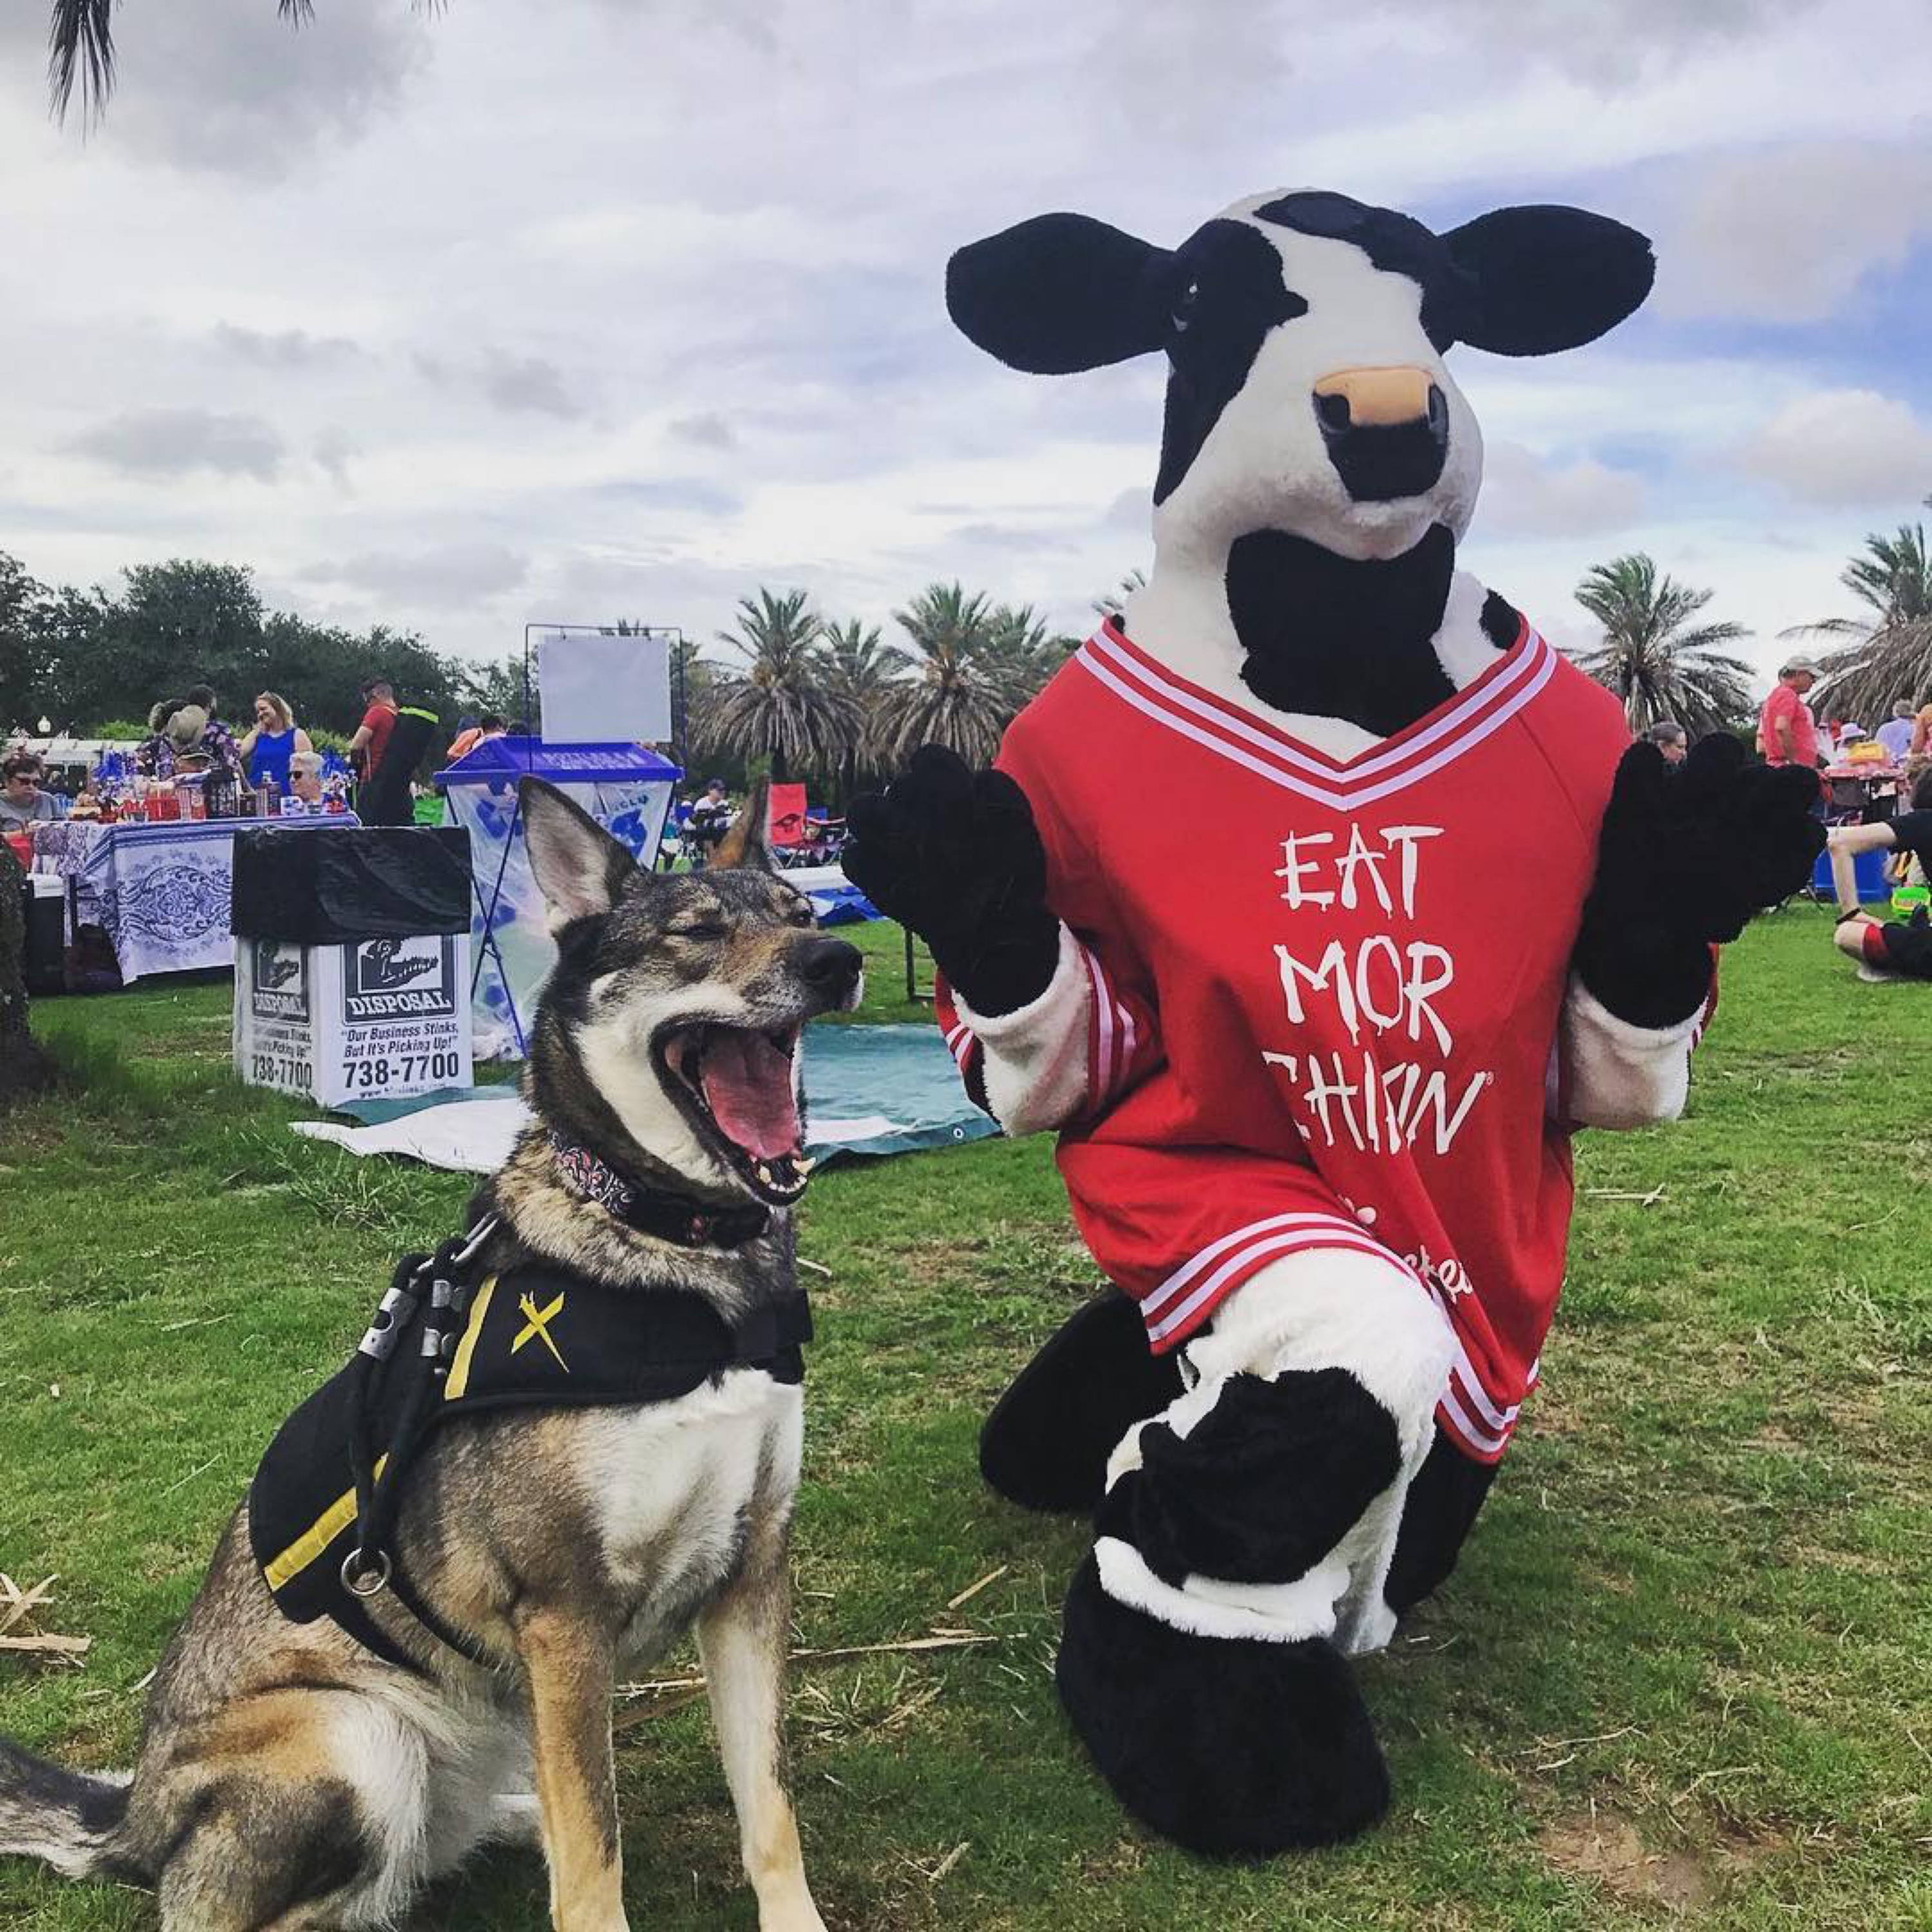 husky dog smiling with chick-fil-a mascot cow